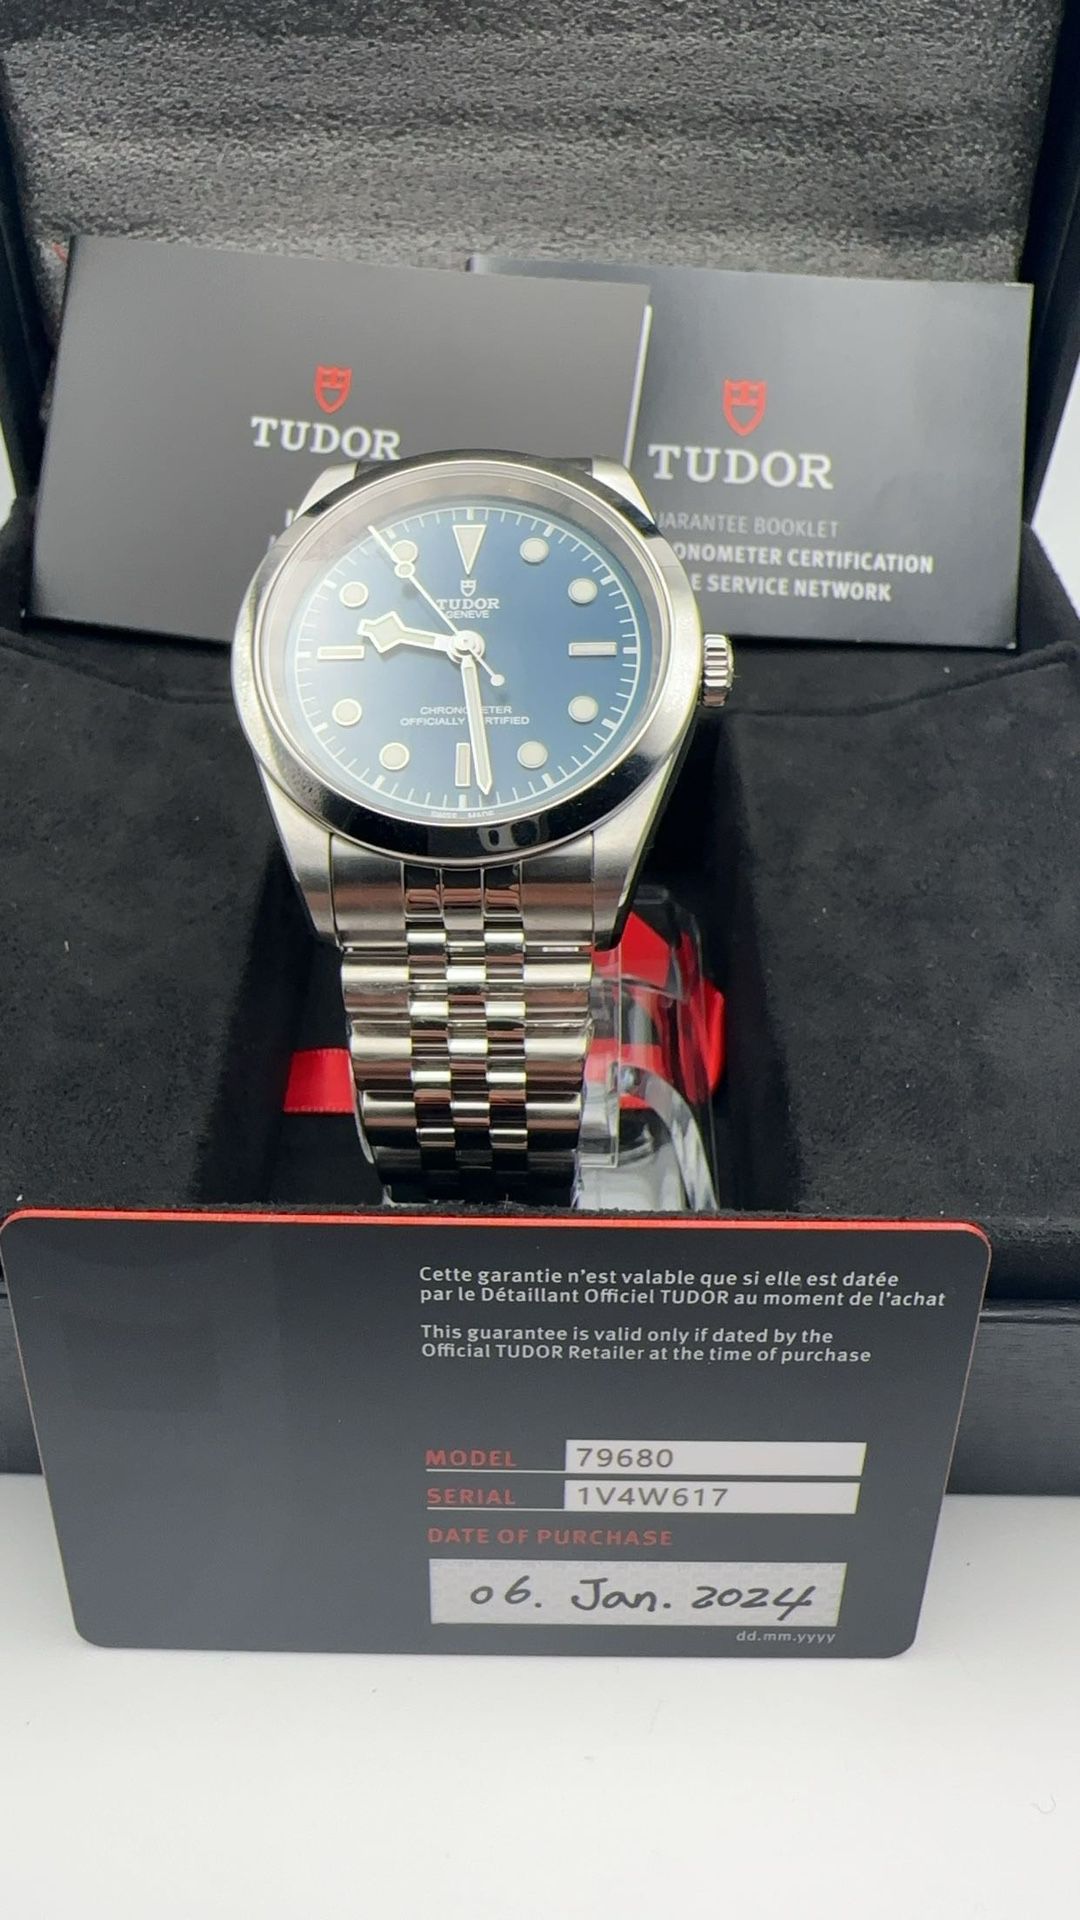 TUDOR Black Bay Blue Men's Watch - M79(contact info removed)